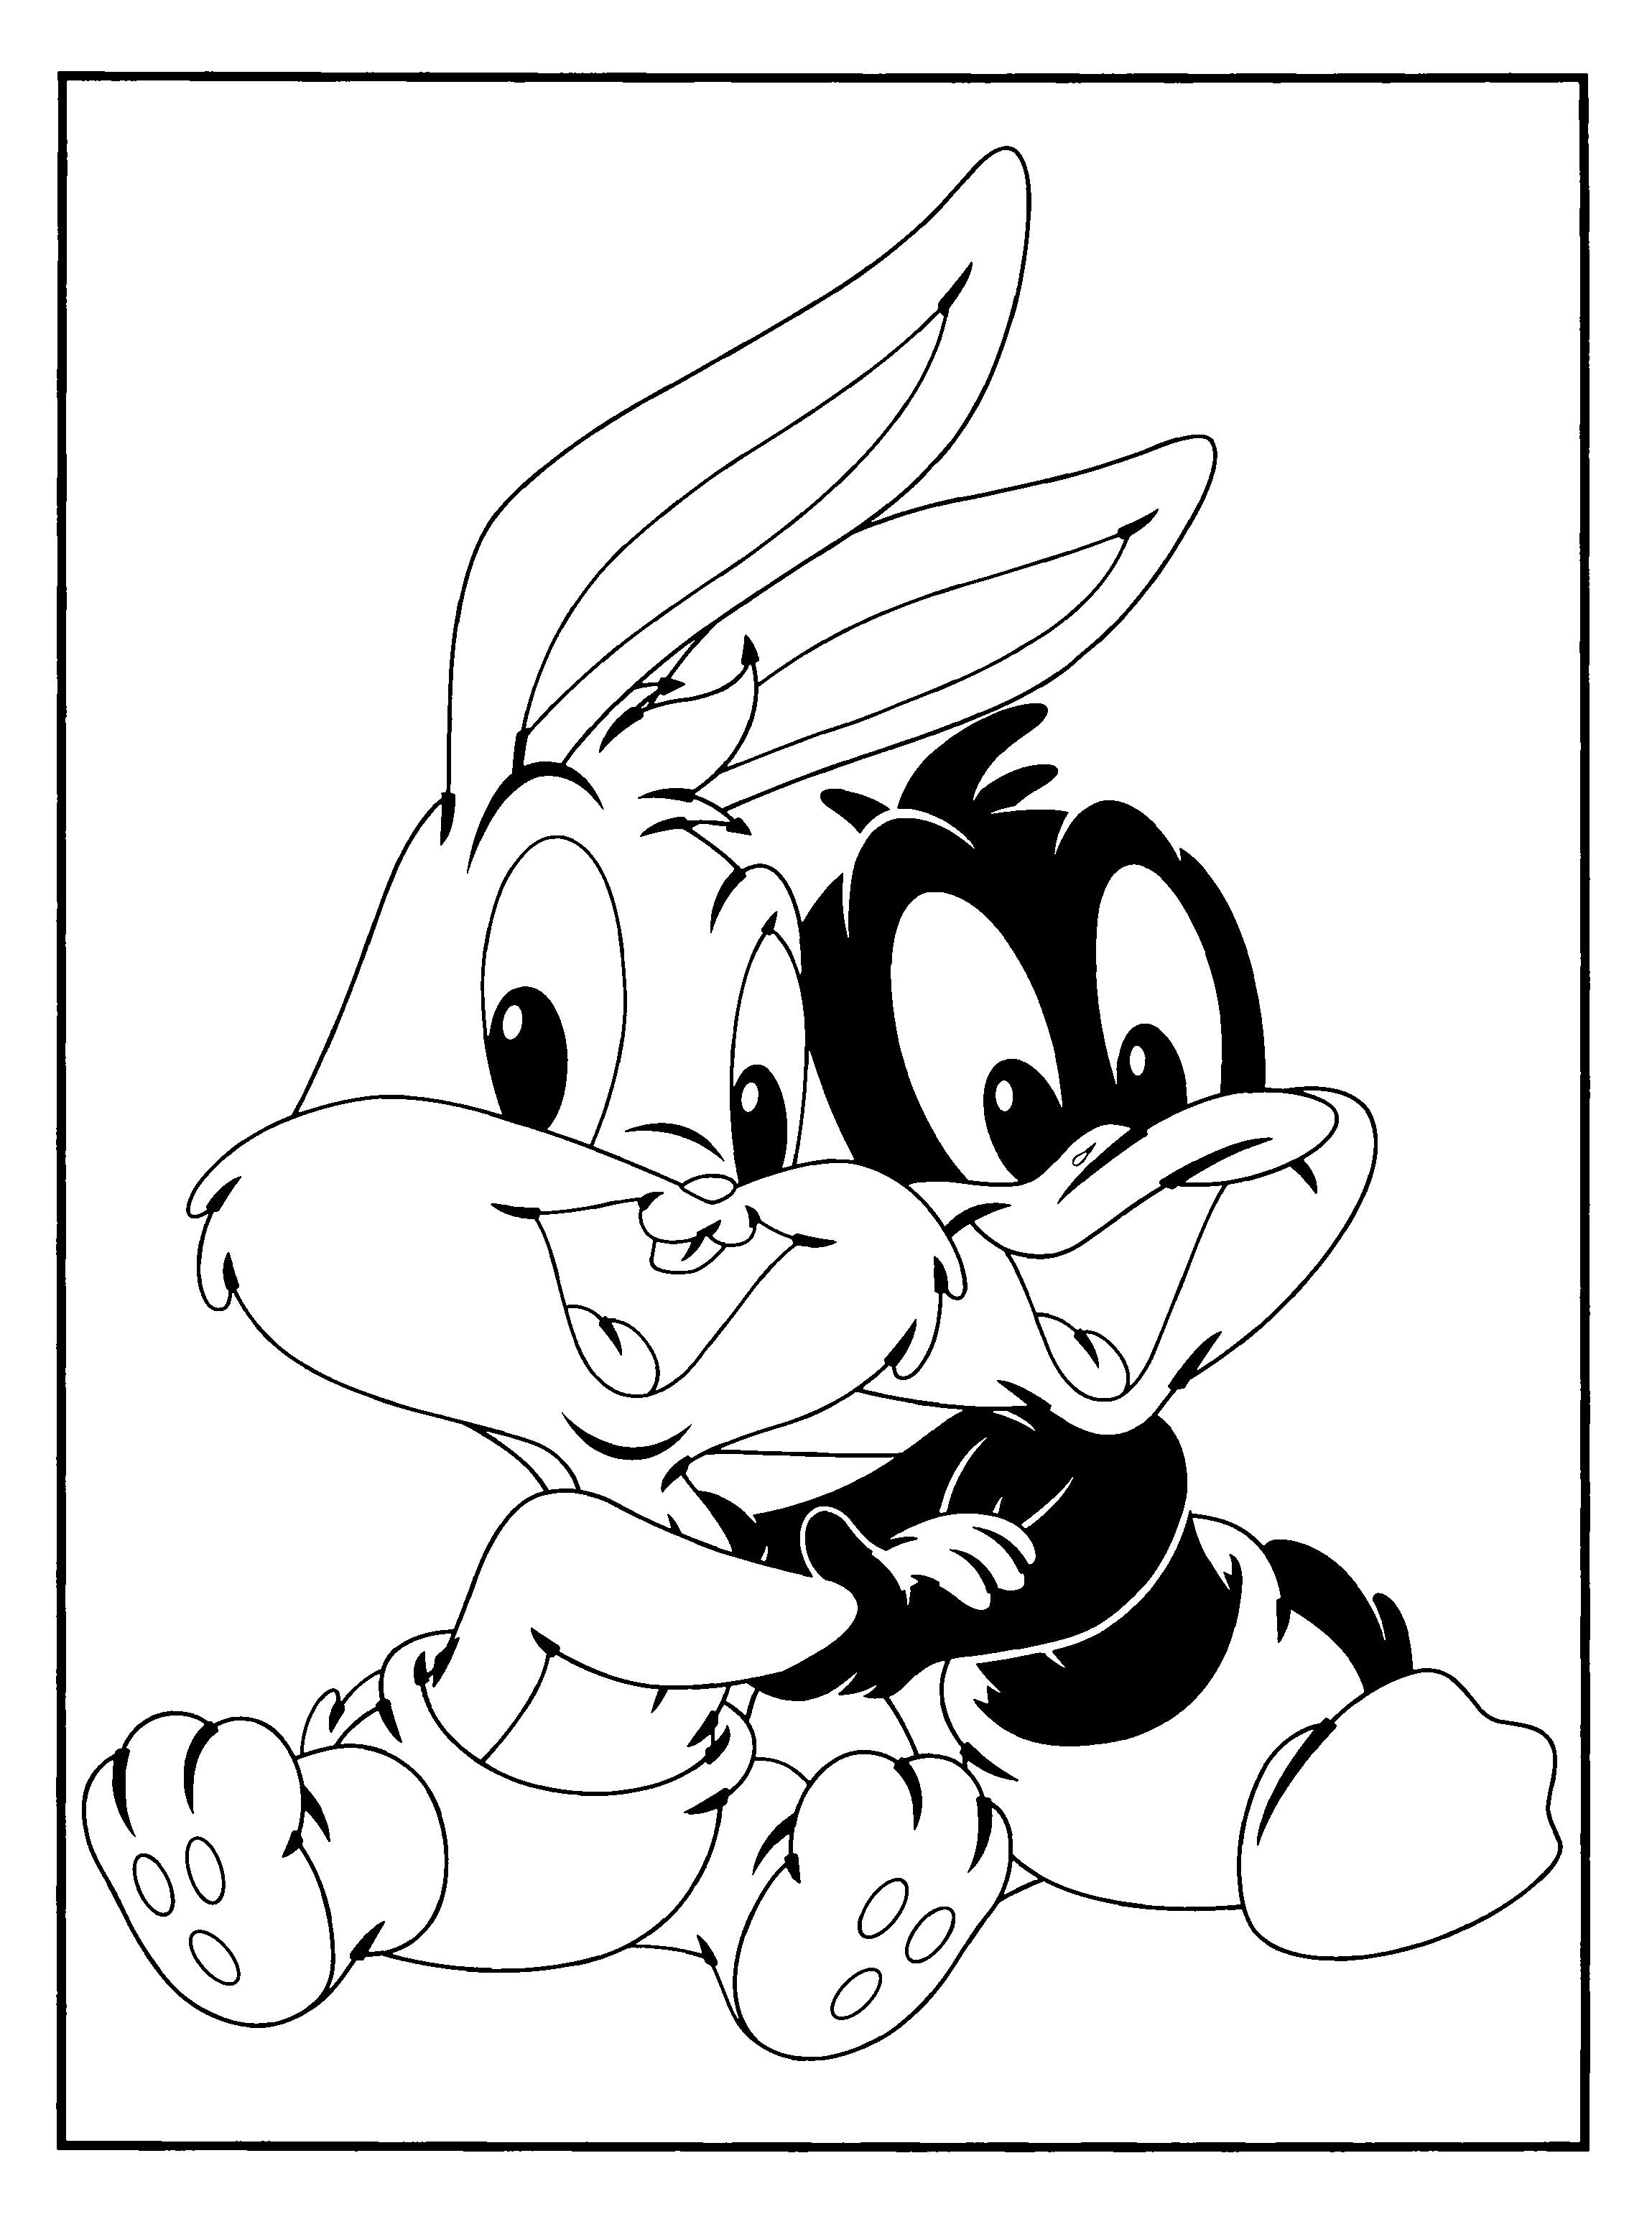 looney toons coloring pages looney tunes coloring pages all looney tunes characters pages coloring toons looney 